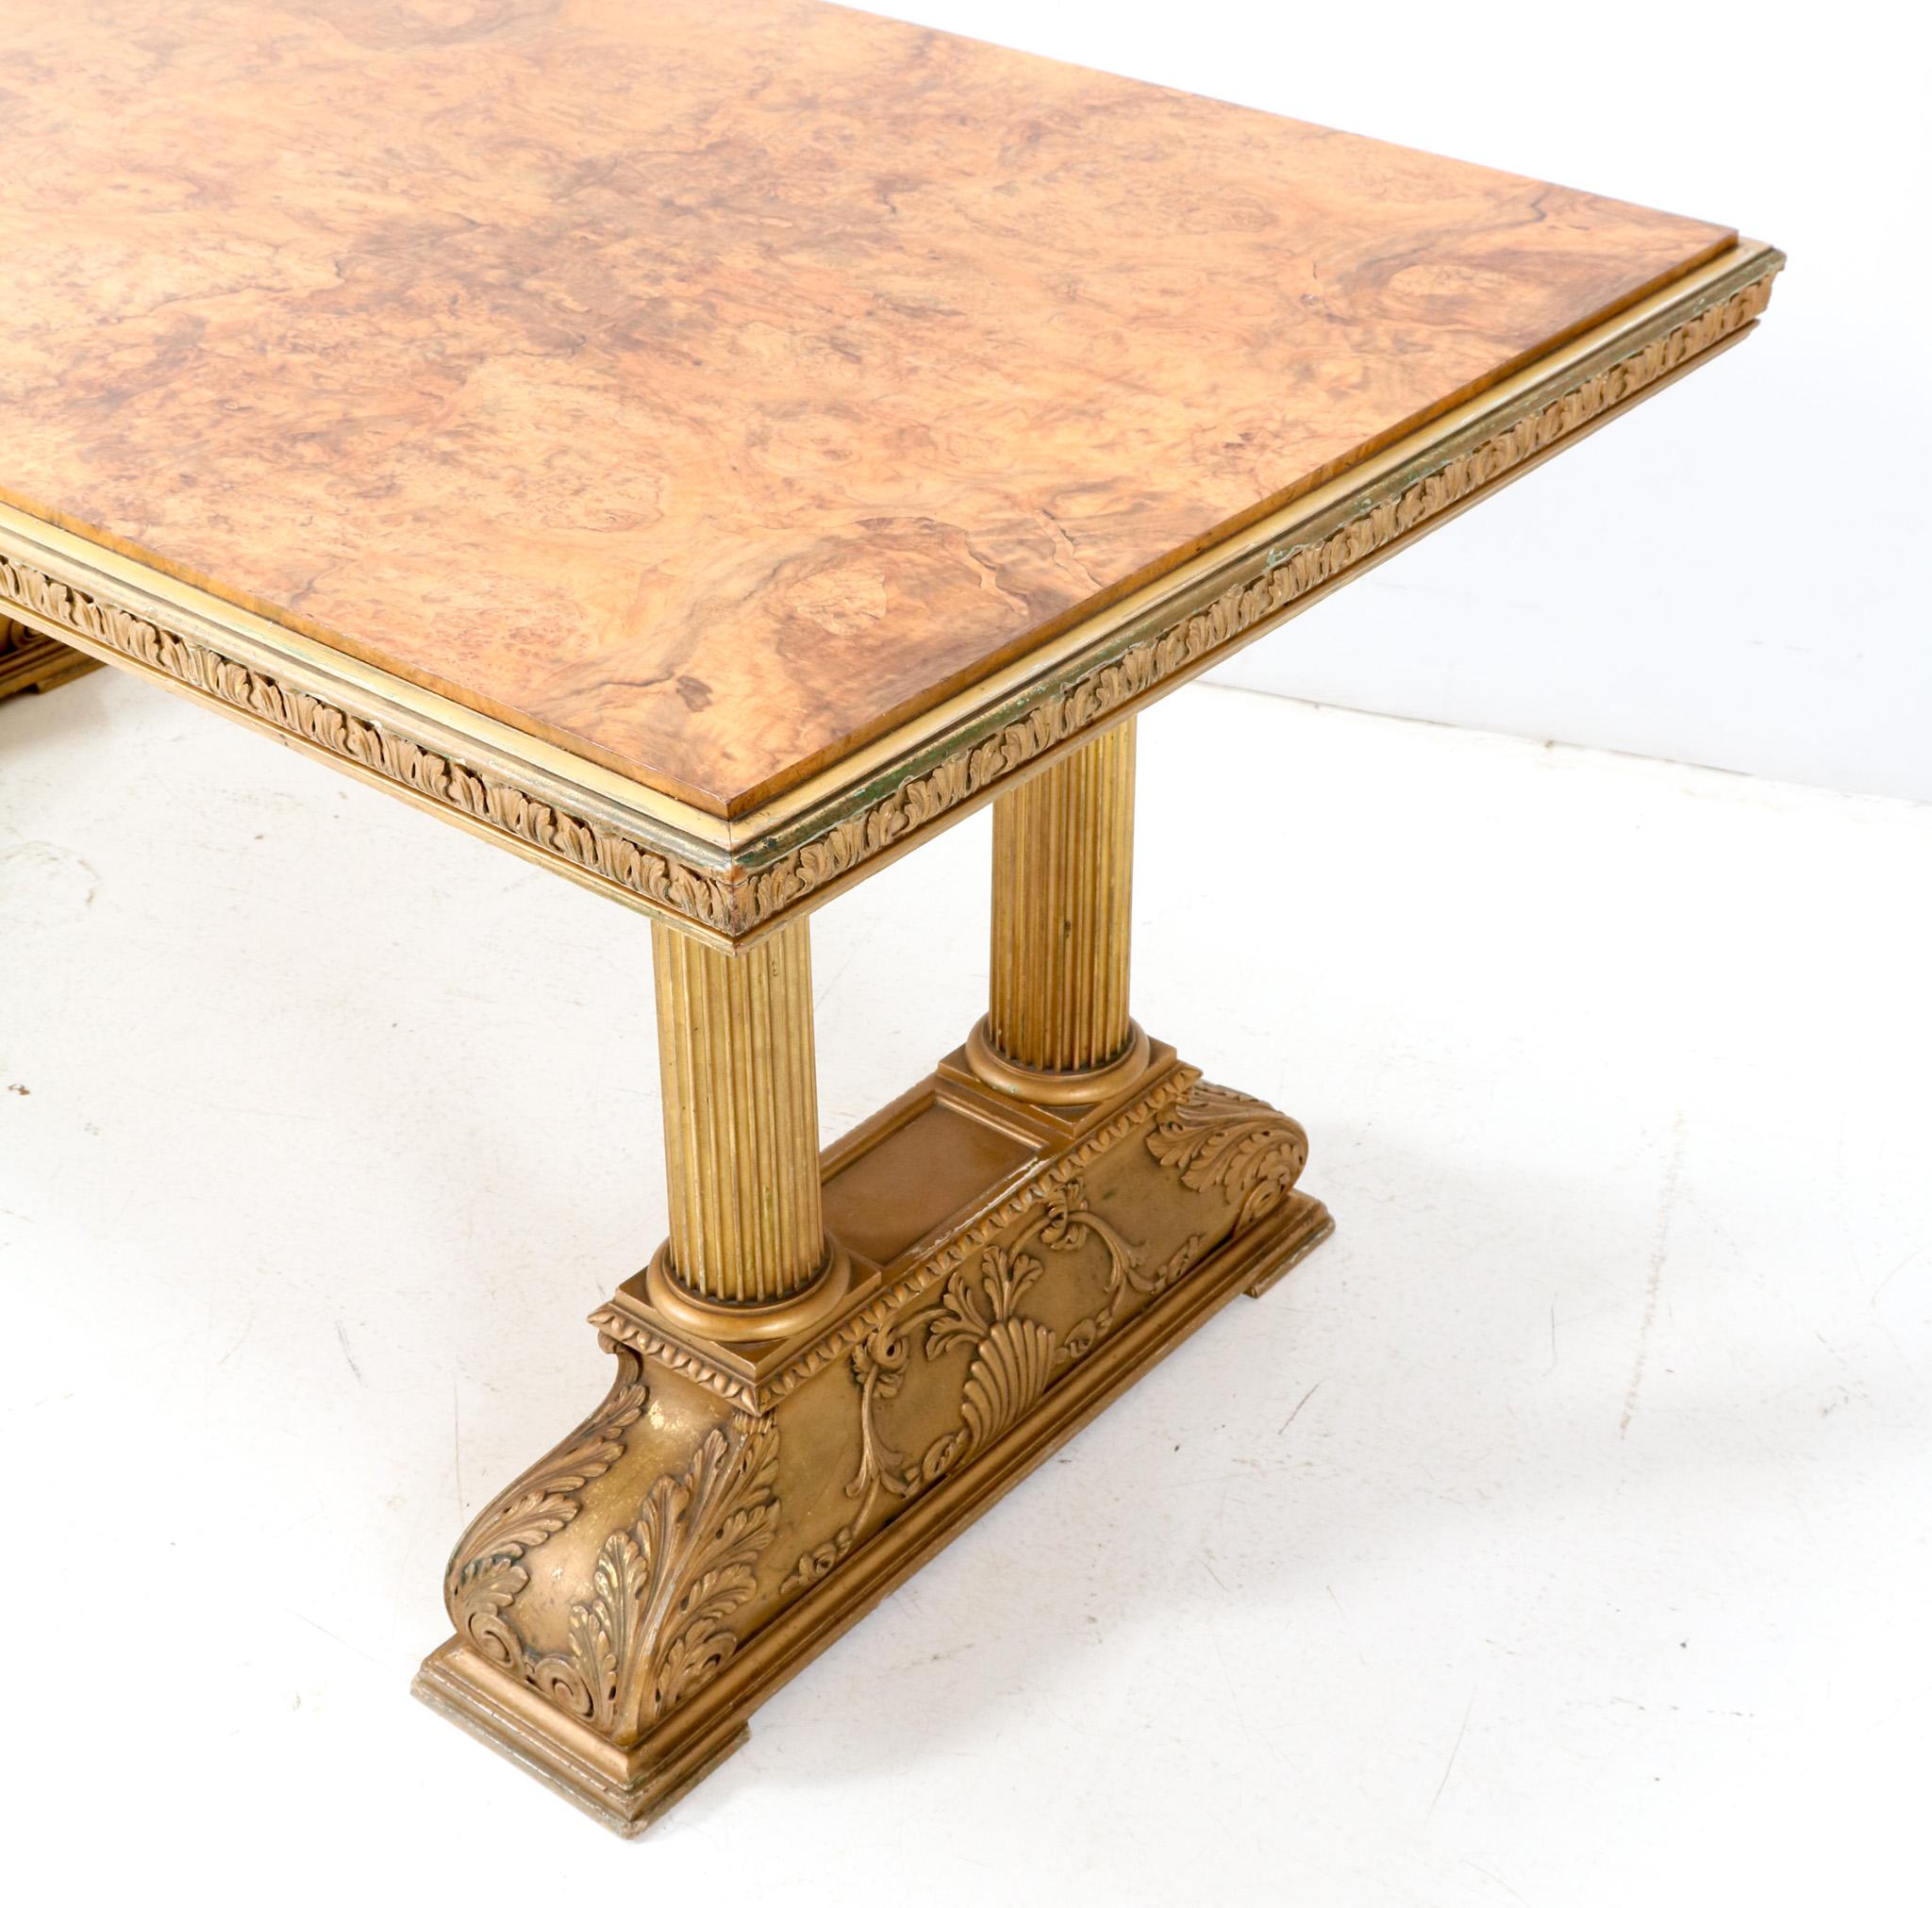 Swedish Dining Room Table Caesar by Axel Einar Hjorth with Original Extensions, 1920s For Sale